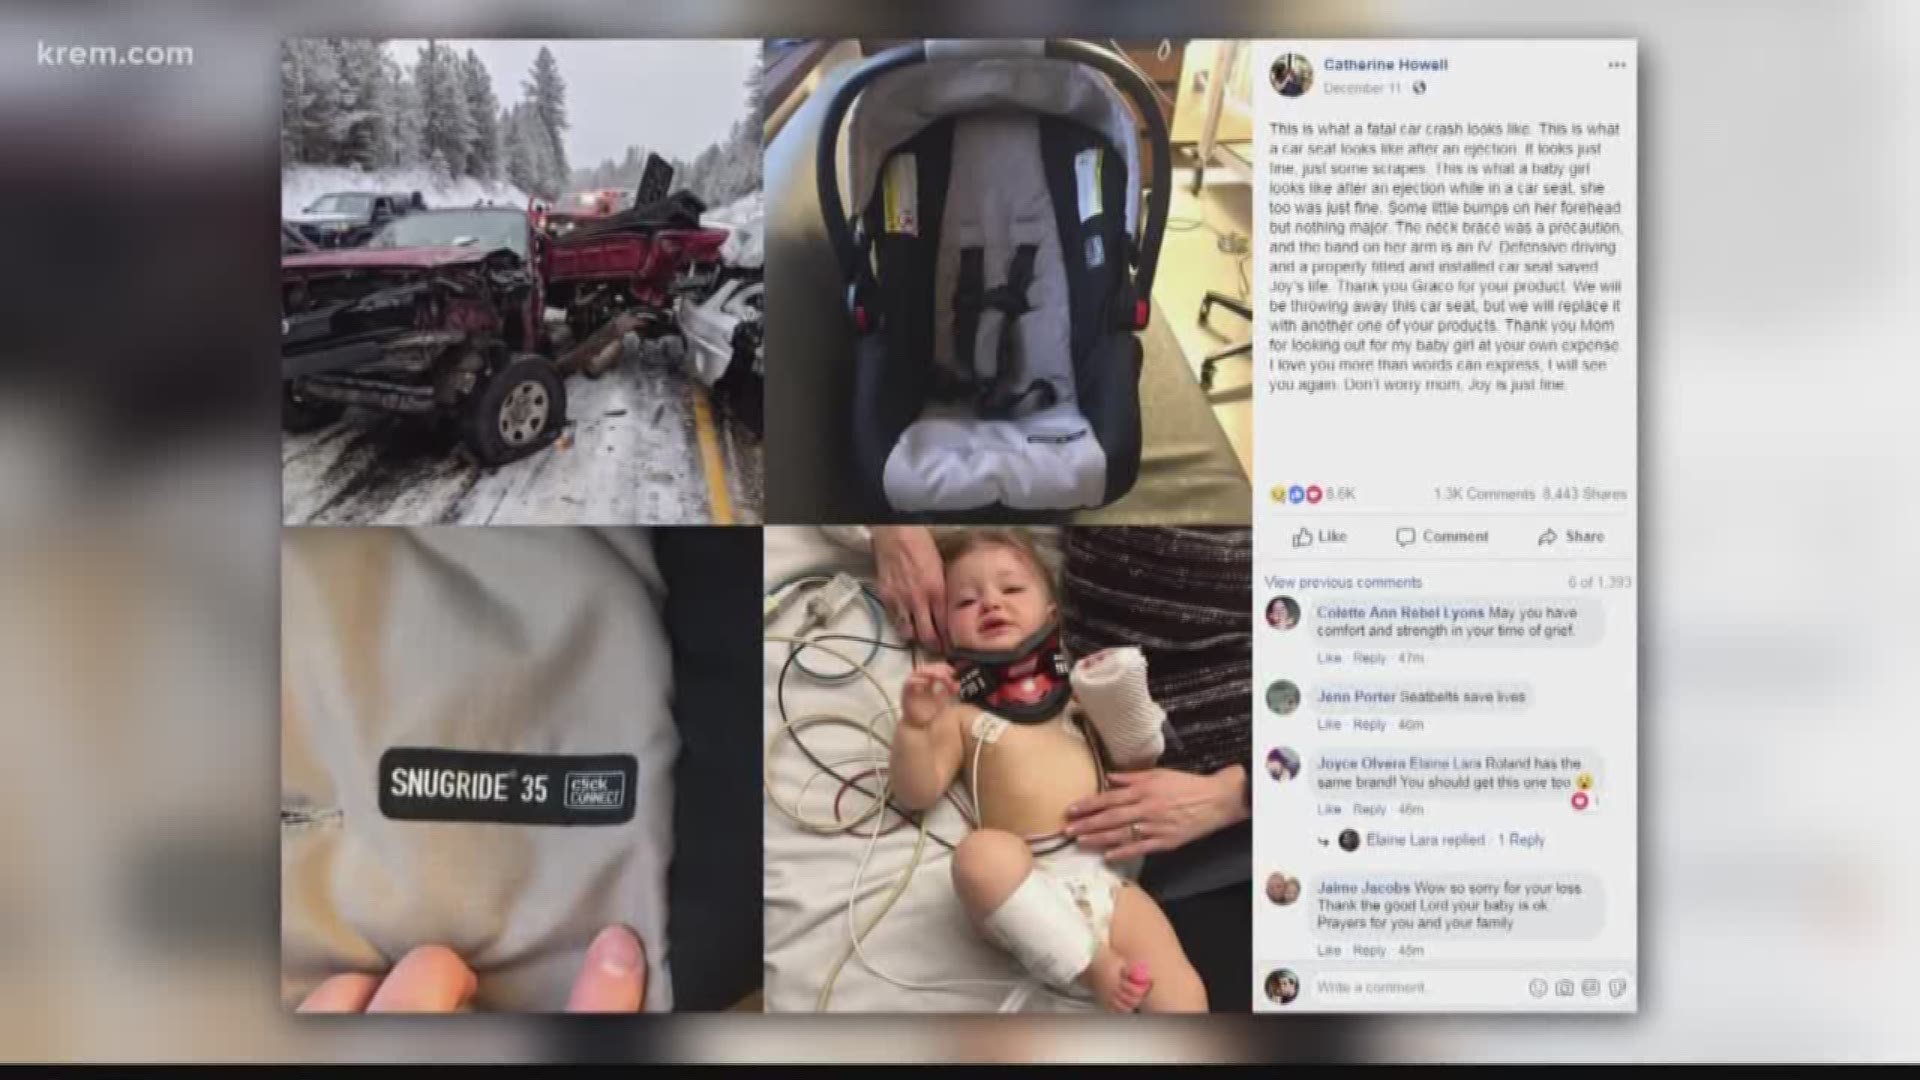 Catherine Howell posted on Facebook about the crash. She said her daughter was ejected from the car during the crash. She was found 60 yards away from the crash site, Howell's husband Josh said.